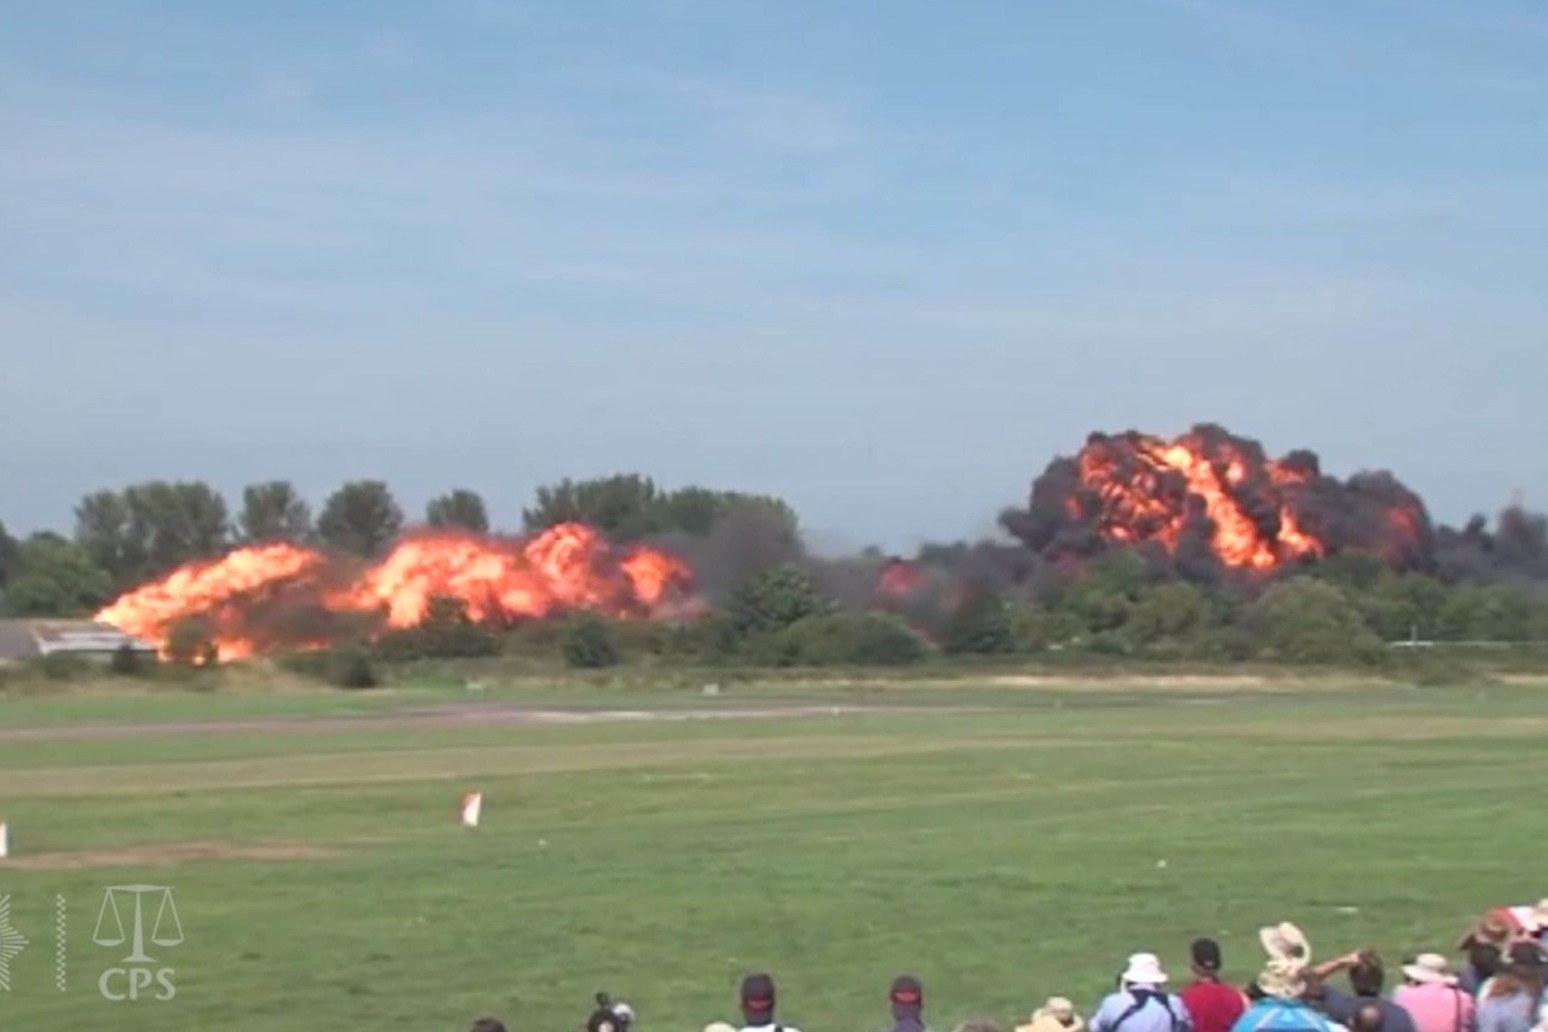 Pilot’s poor flying led to 11 unlawful deaths in Shoreham Airshow, coroner rules 